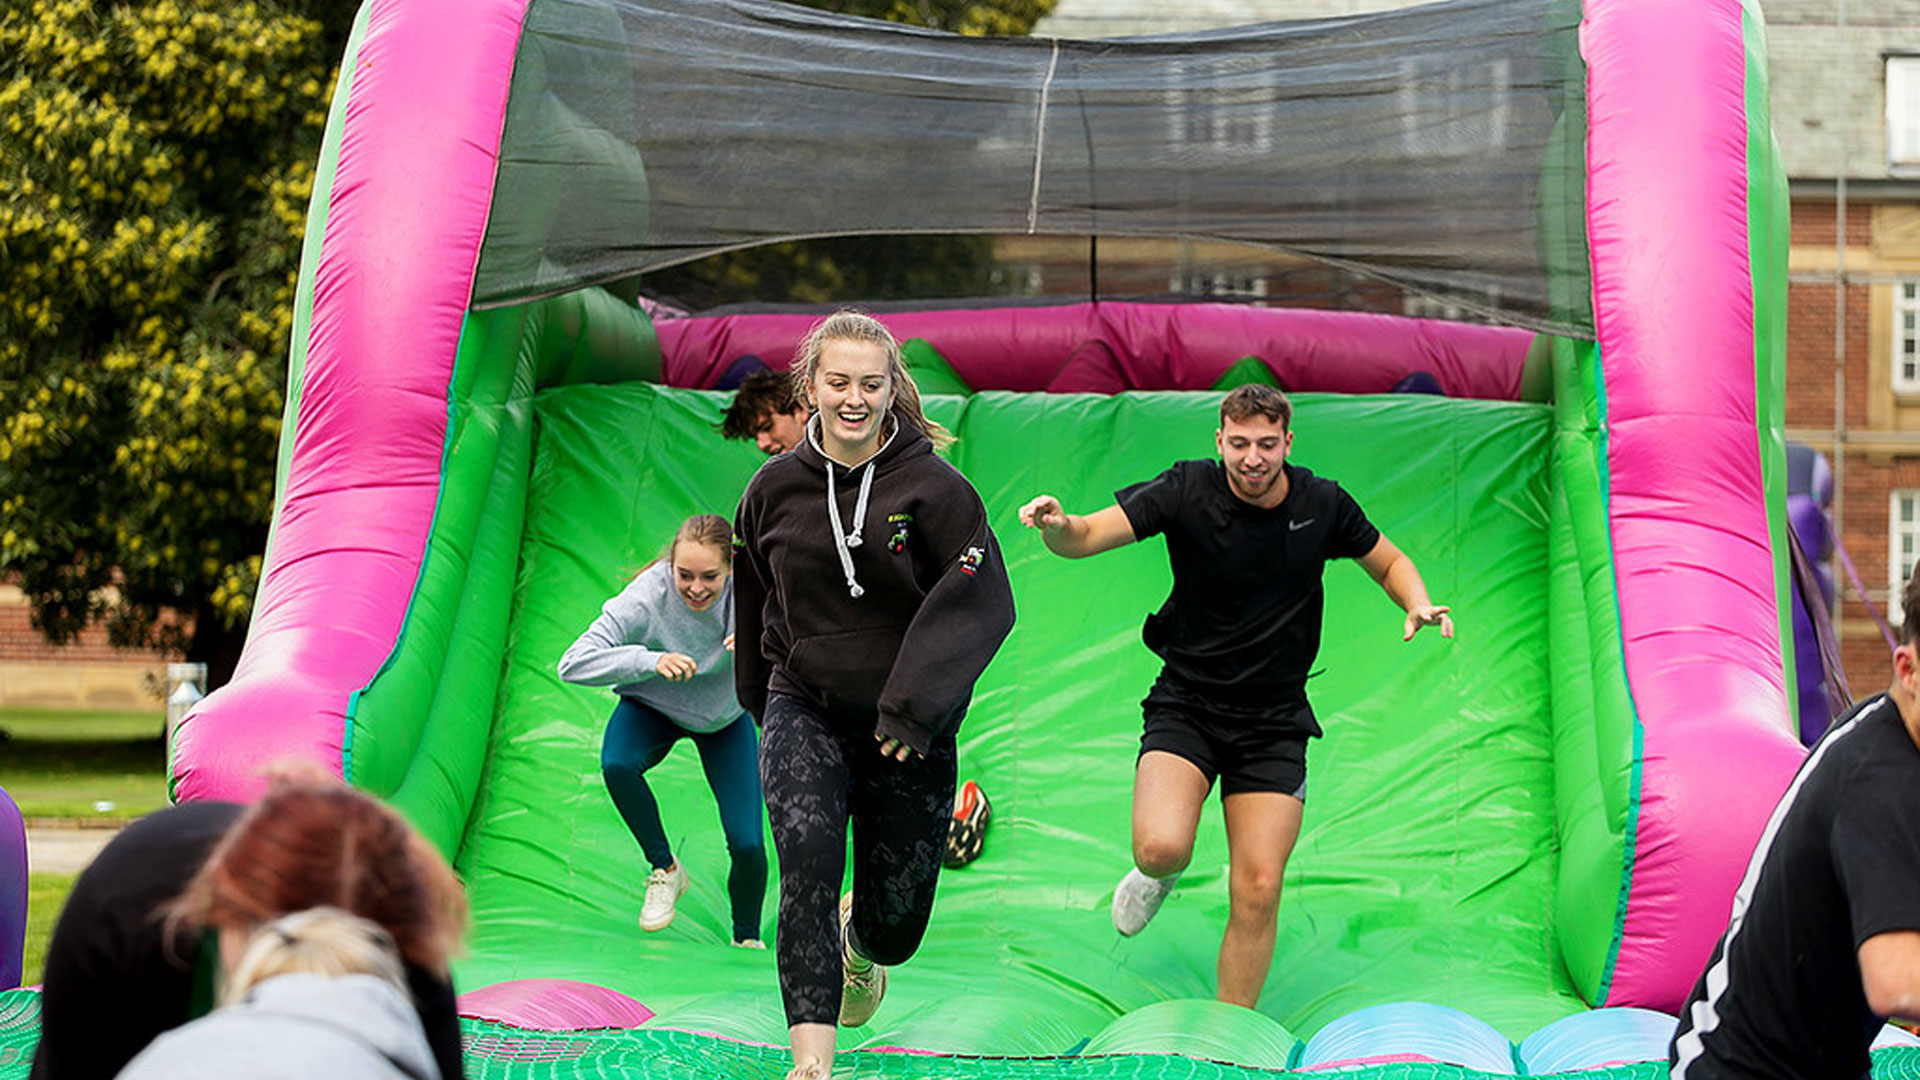 Students on an inflatable assault course during Induction Week